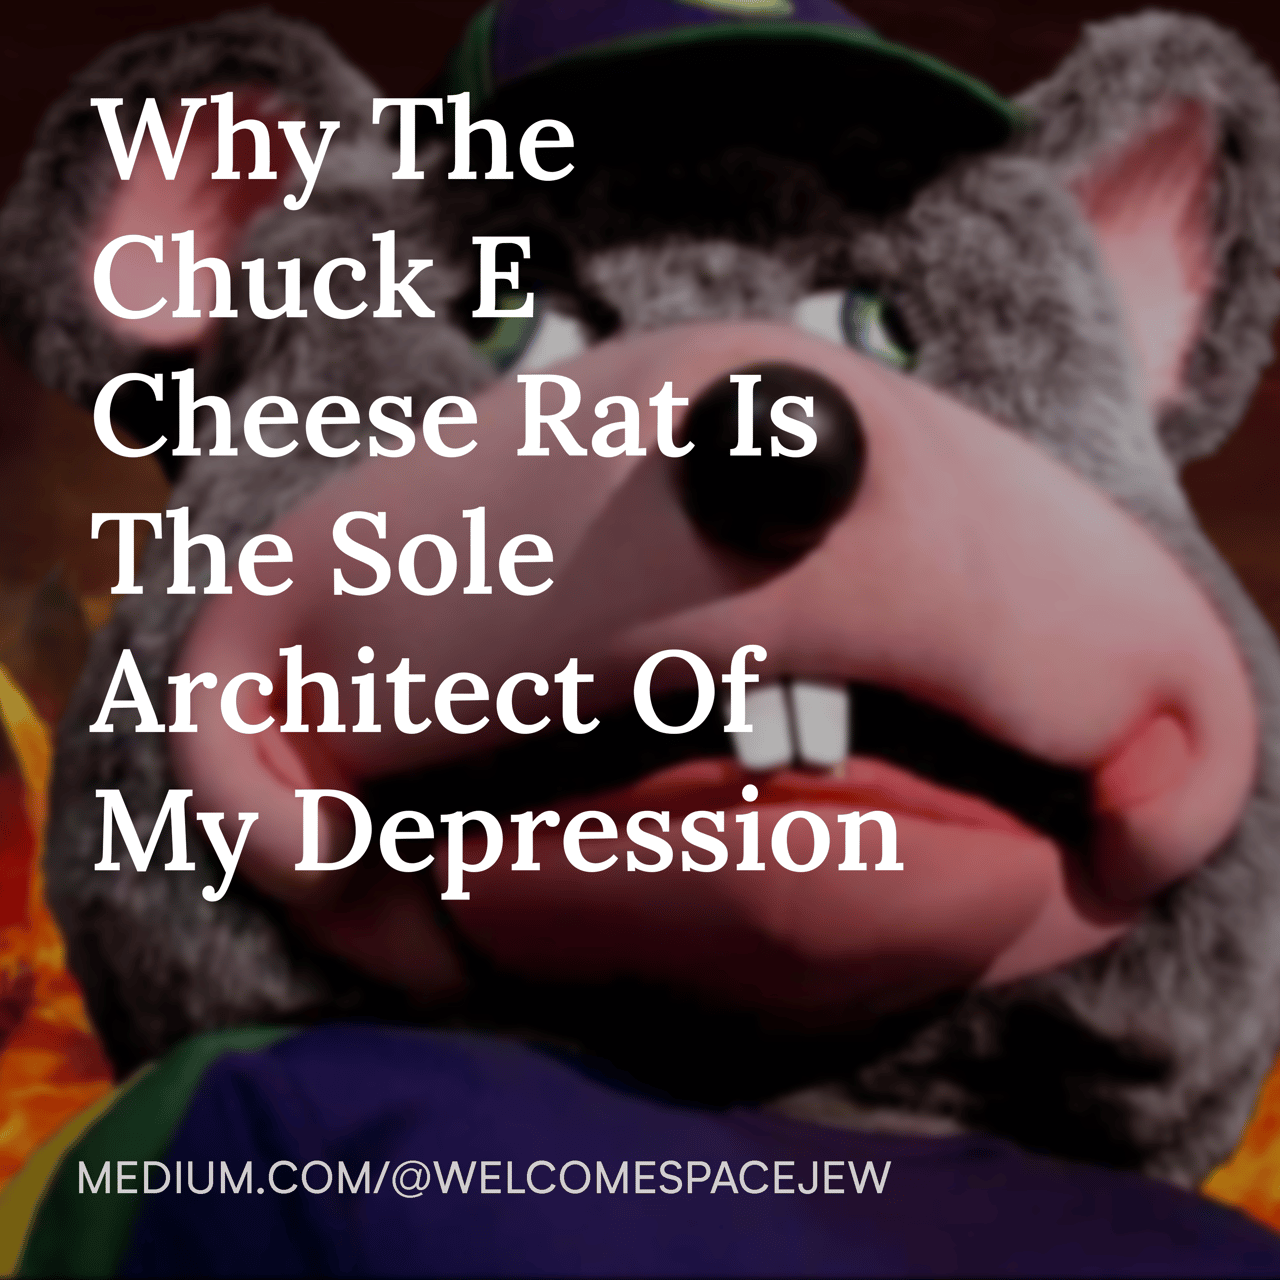 Chuck E Cheese menacingly looks on in front of the hell, his eyes pointed in different directions. The articles titled overhead: "Why The Chuck E Cheese Rat Is The Sole Architect Of My Depression"